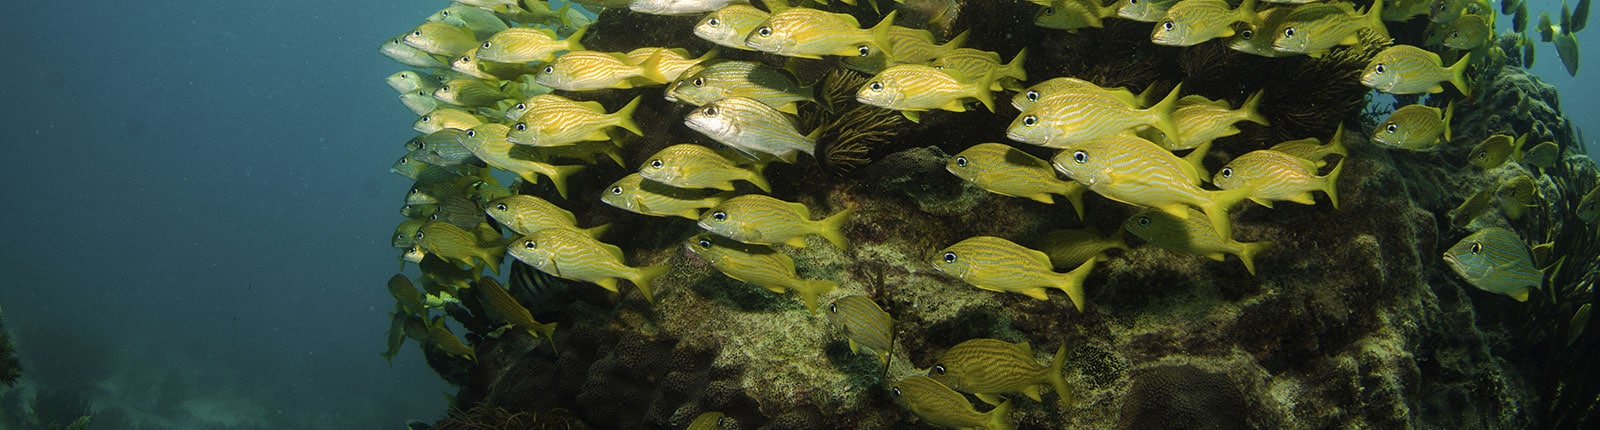 A school of yellow fish along a reef in Bonaire